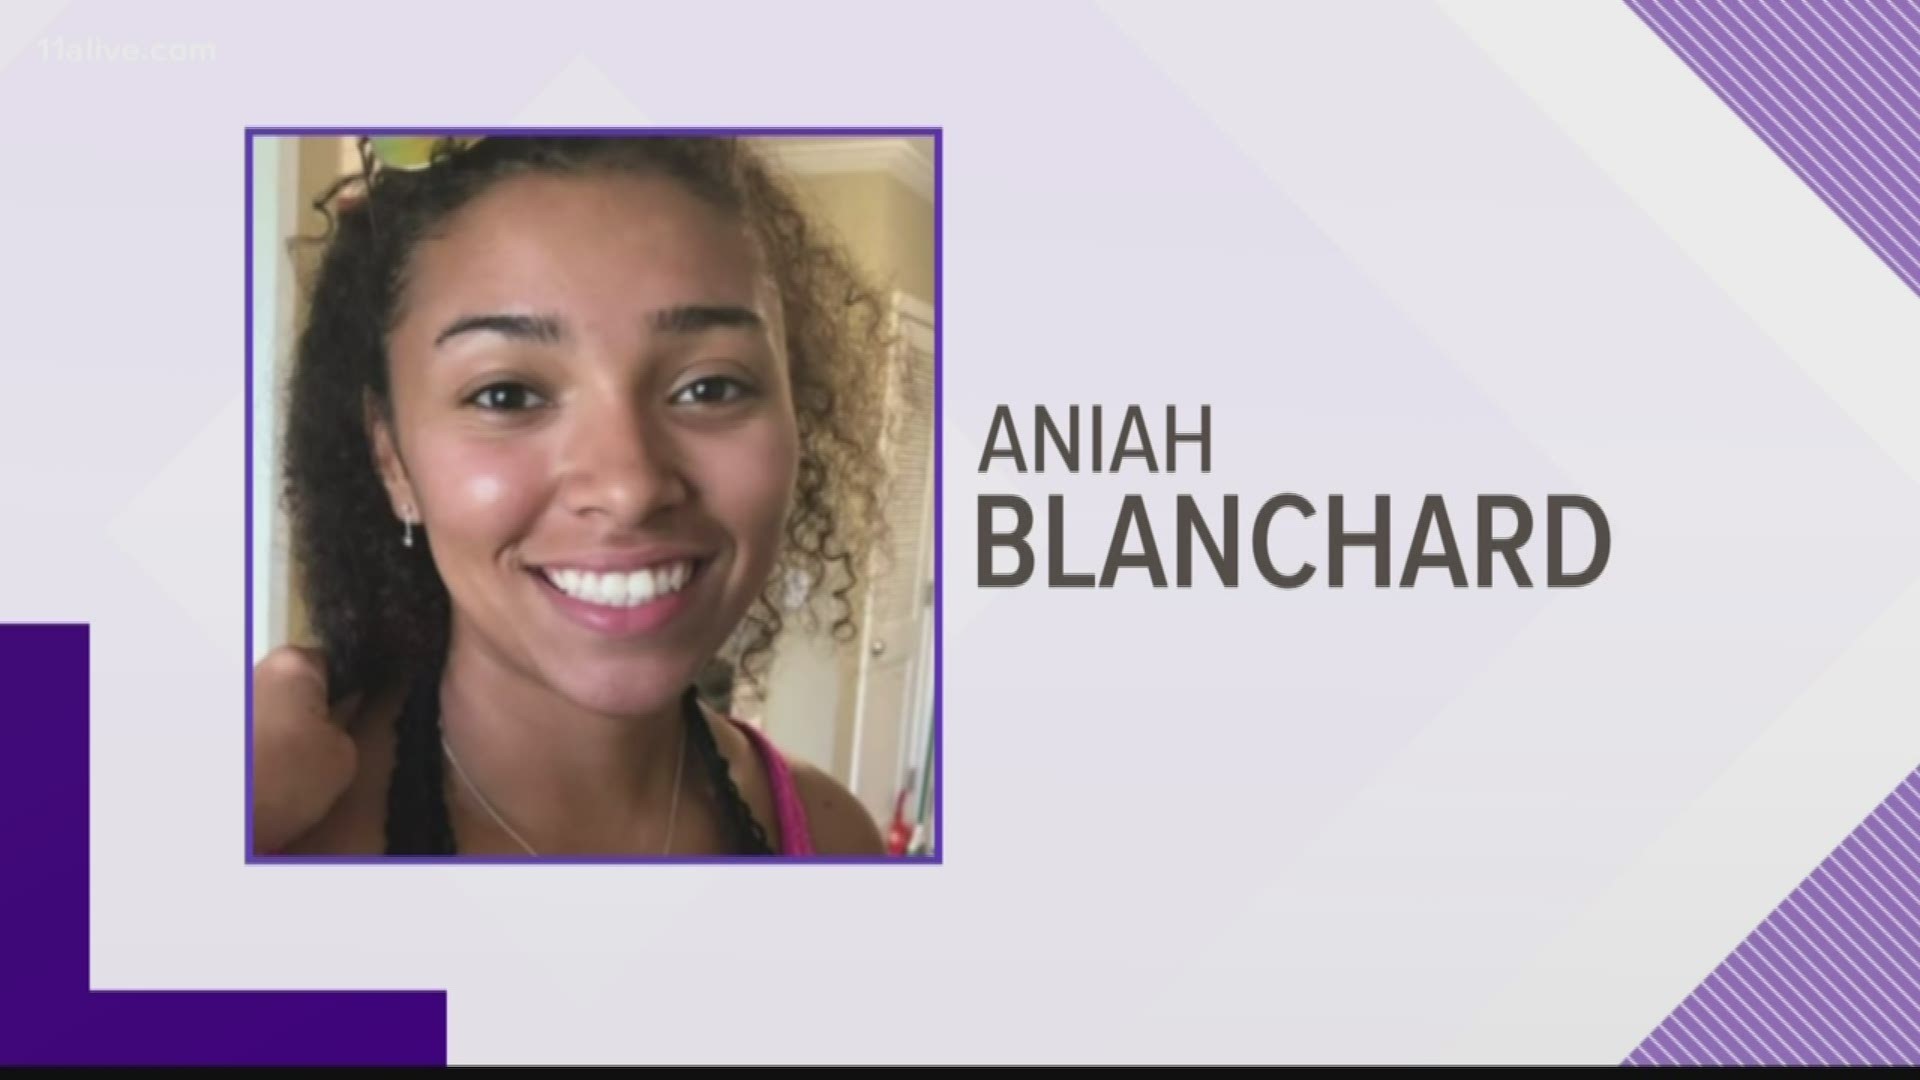 Aniah Haley Blanchard was reported missing on October 24, police said. She last talked to a friend just before midnight Wednesday.